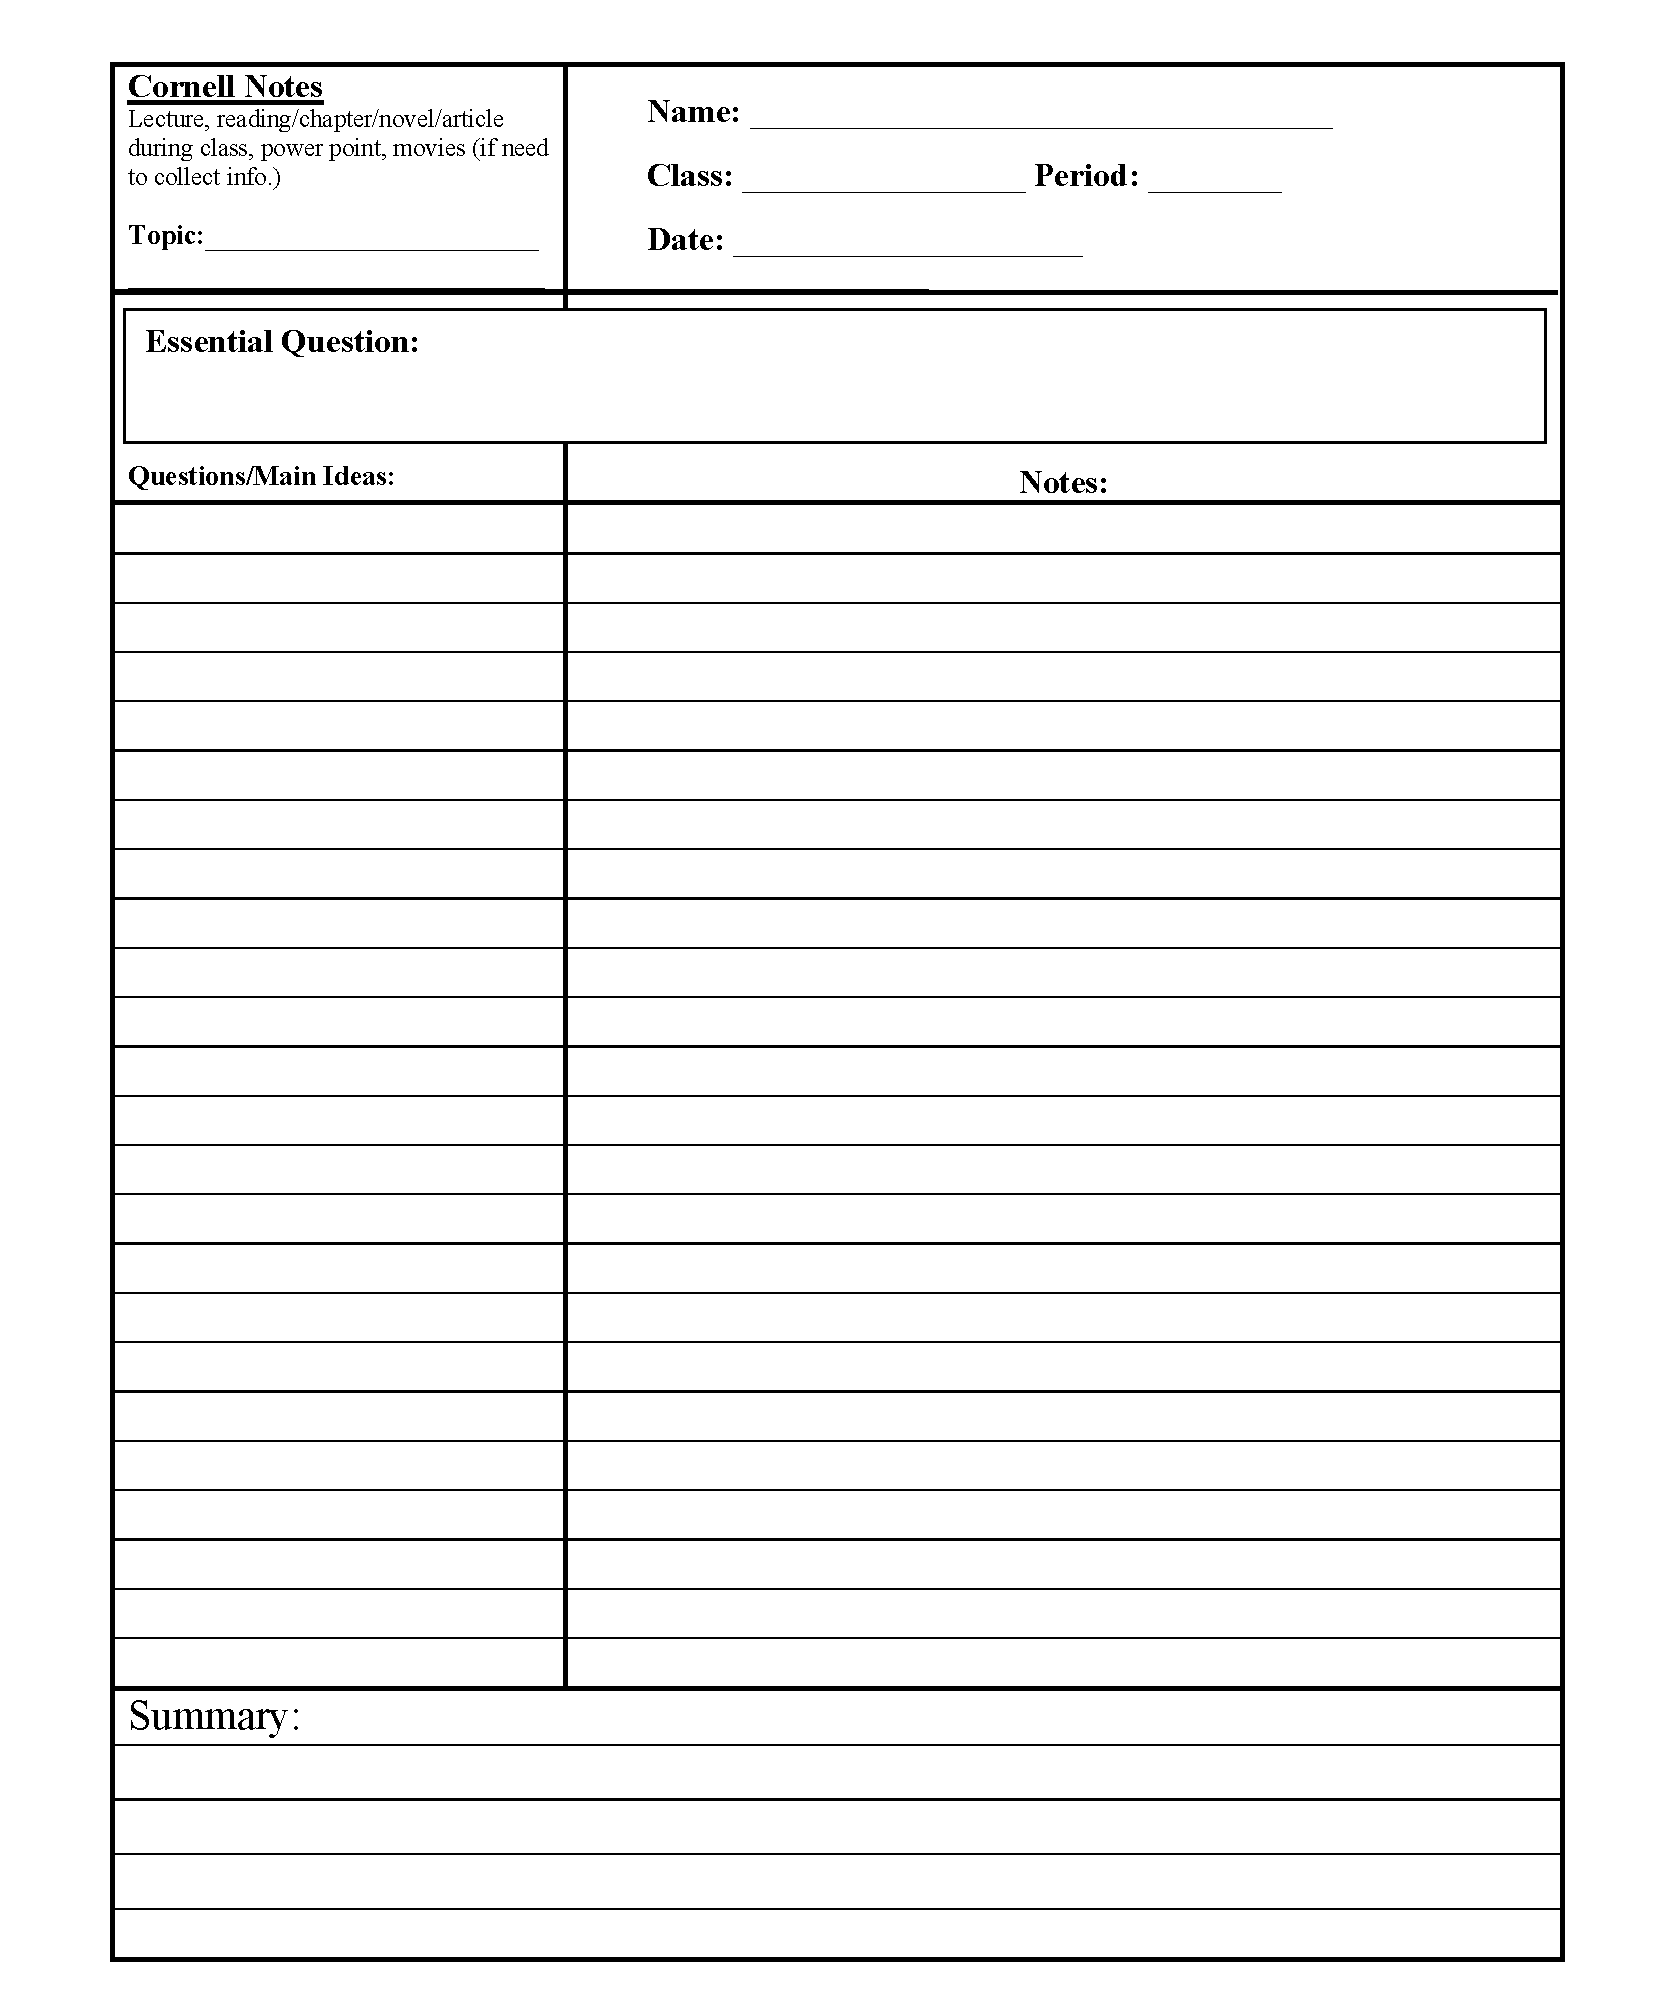 Blank Cornell Notes Template Notes Word Doc